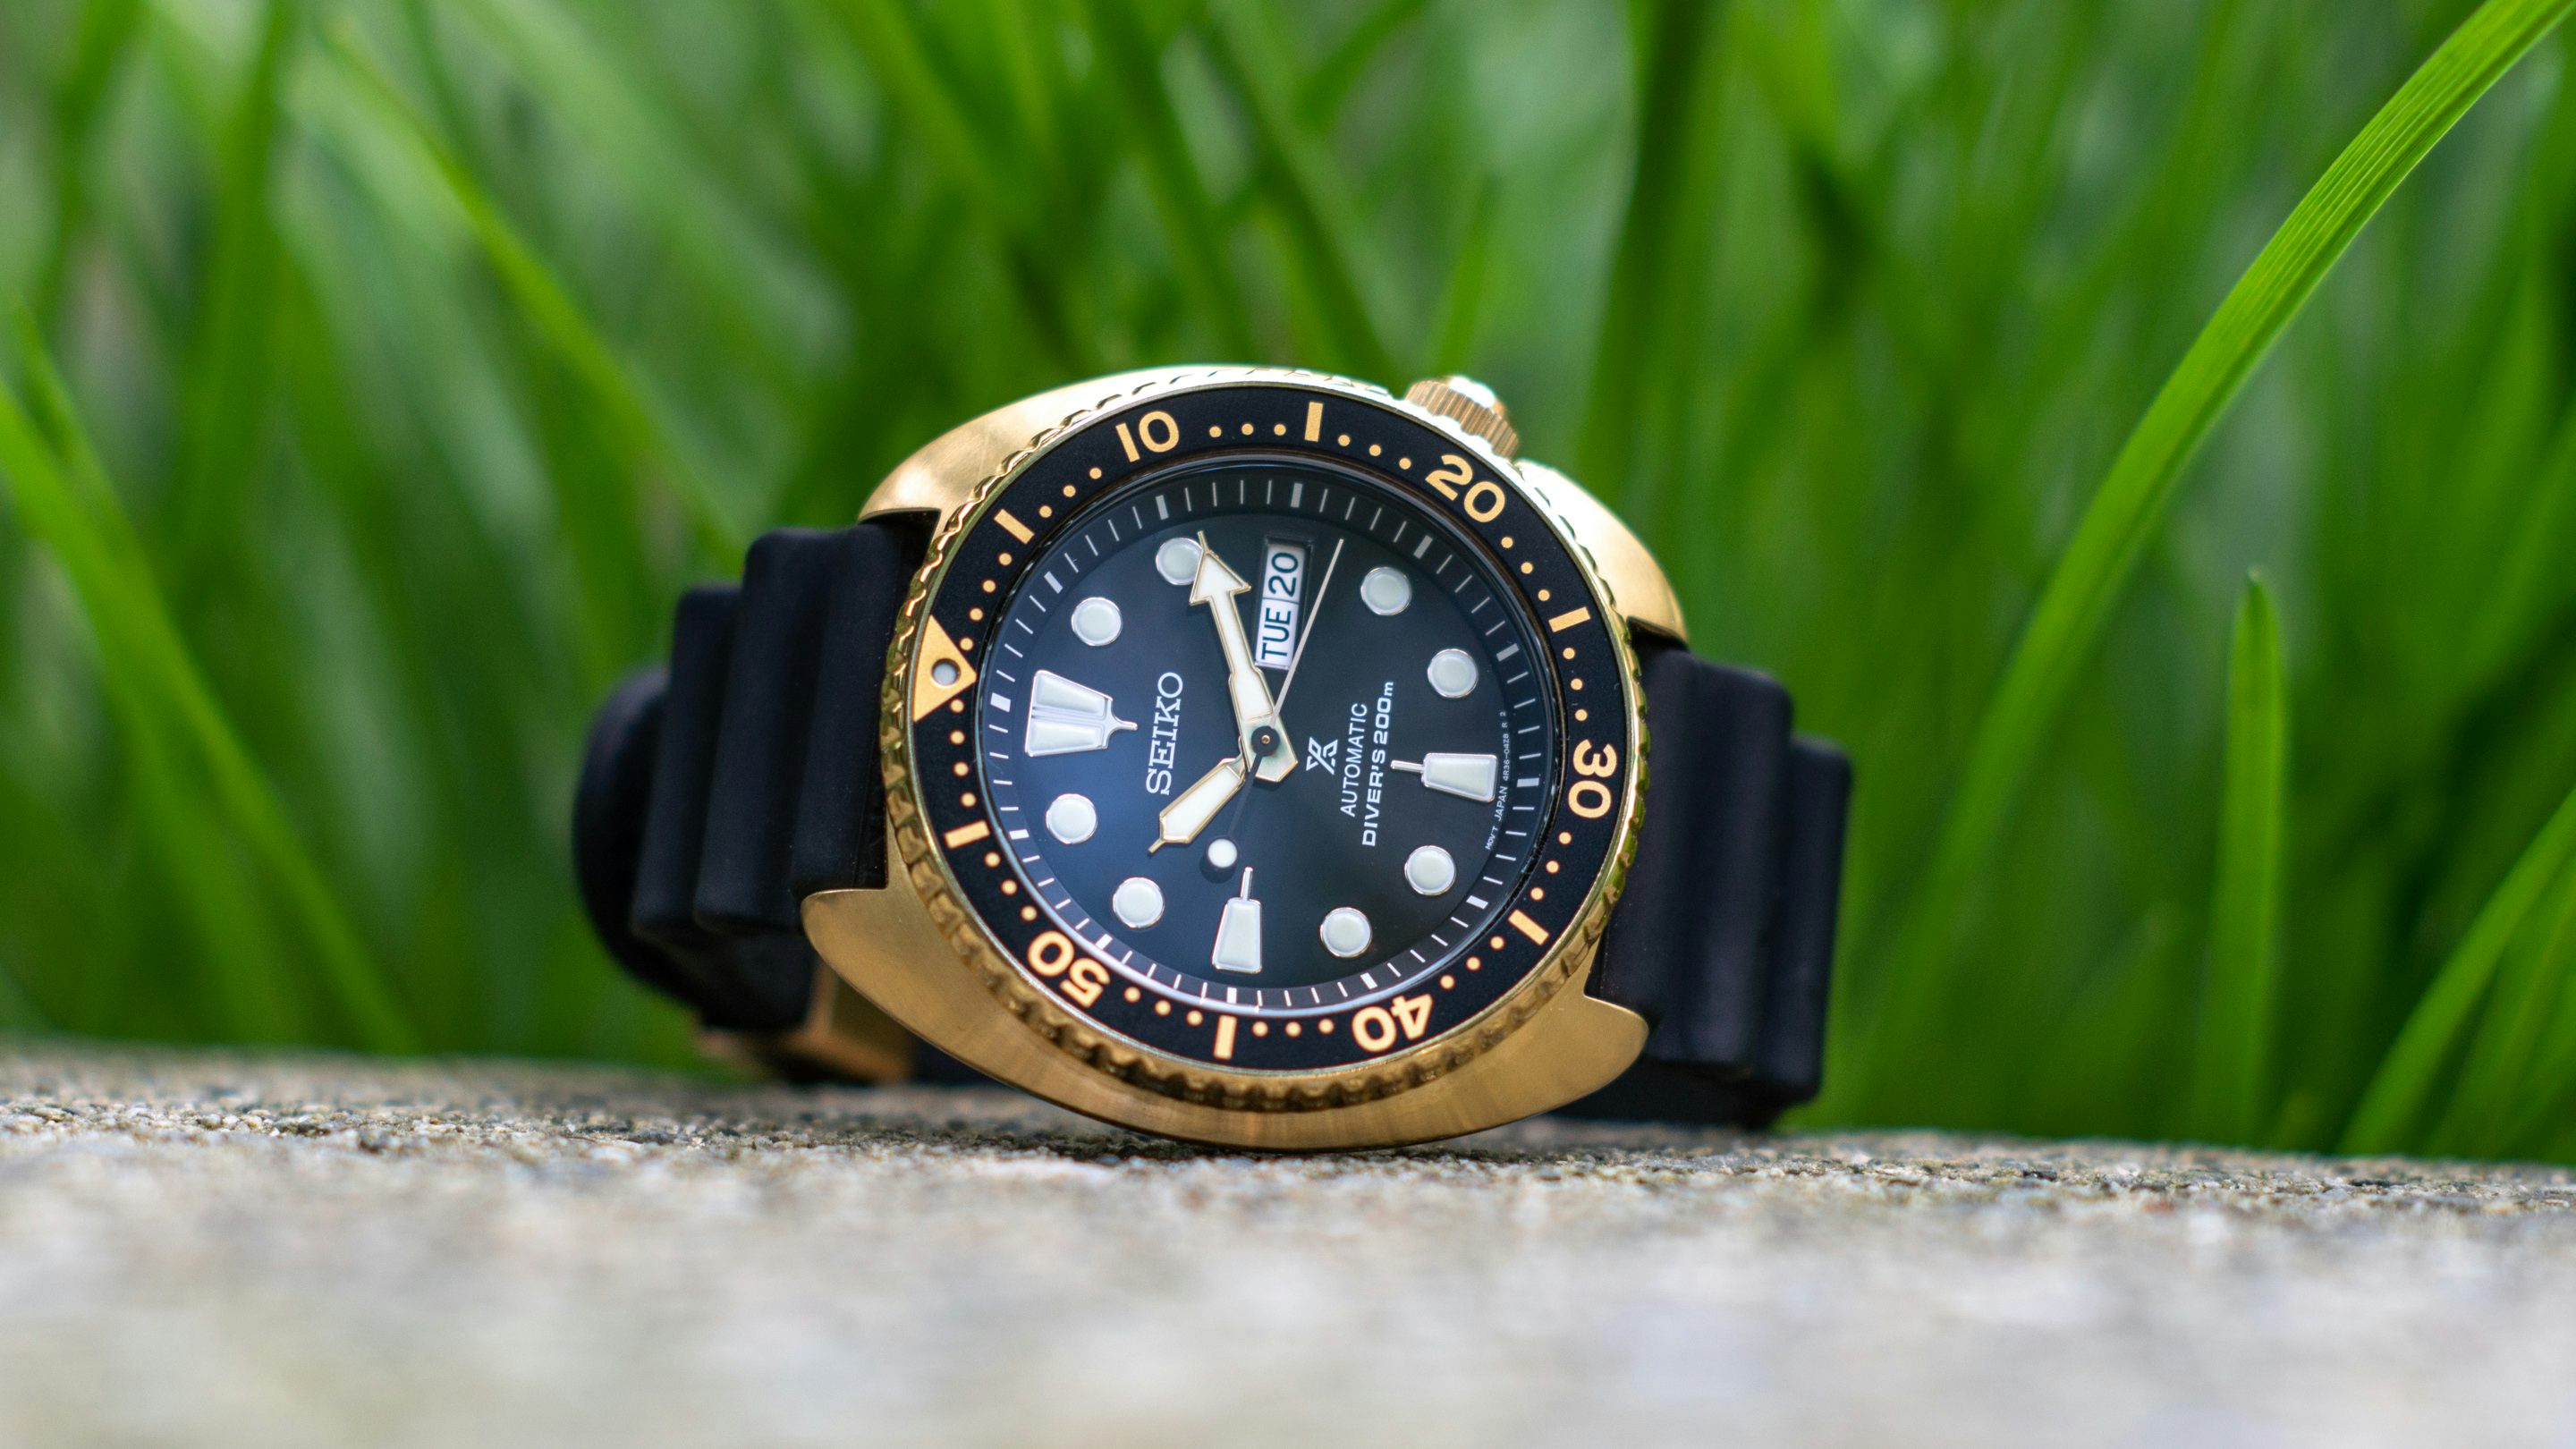 Hands-On: The Seiko Prospex SRPC44, A Healthy Dose Of Golden